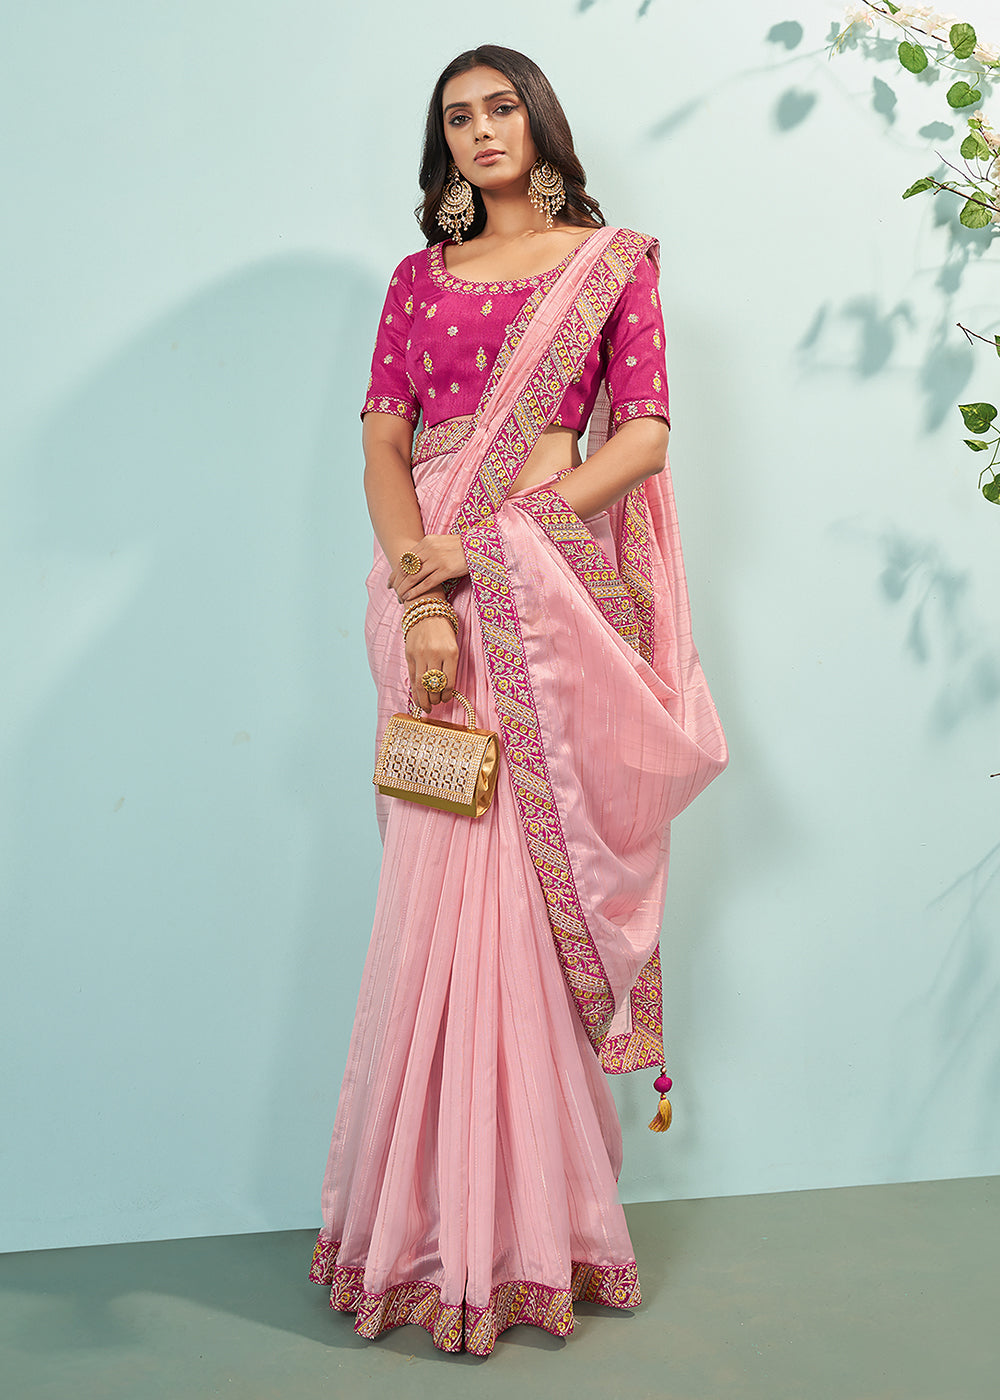 Buy Now Pretty Pink Organza Embroidered Designer Saree Online in USA, UK, Canada & Worldwide at Empress Clothing.